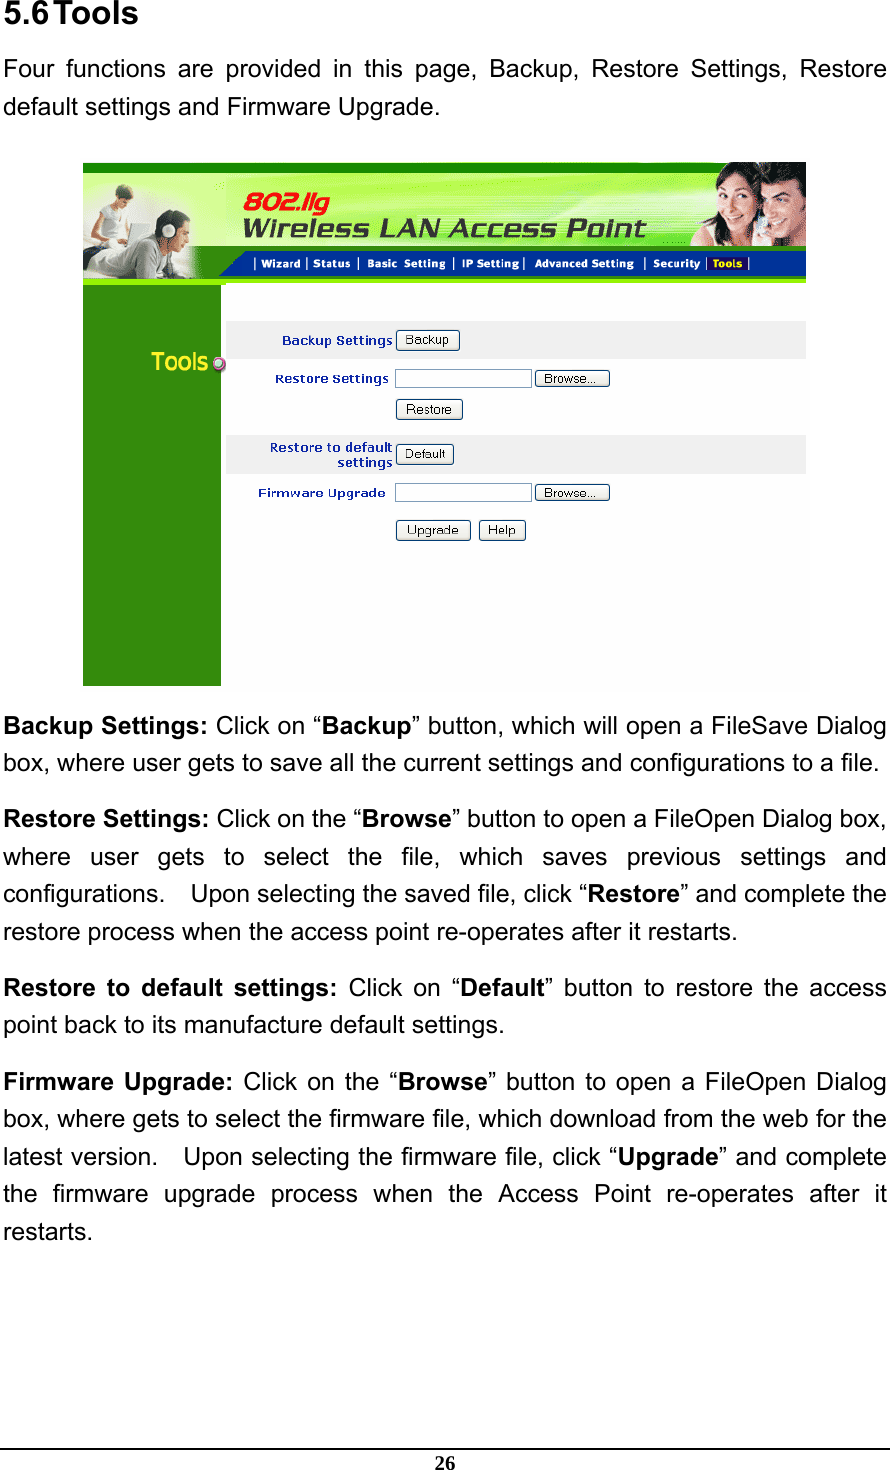 26 5.6 Tools Four functions are provided in this page, Backup, Restore Settings, Restore default settings and Firmware Upgrade.  Backup Settings: Click on “Backup” button, which will open a FileSave Dialog box, where user gets to save all the current settings and configurations to a file. Restore Settings: Click on the “Browse” button to open a FileOpen Dialog box, where user gets to select the file, which saves previous settings and configurations.  Upon selecting the saved file, click “Restore” and complete the restore process when the access point re-operates after it restarts. Restore to default settings: Click on “Default” button to restore the access point back to its manufacture default settings. Firmware Upgrade: Click on the “Browse” button to open a FileOpen Dialog box, where gets to select the firmware file, which download from the web for the latest version.  Upon selecting the firmware file, click “Upgrade” and complete the firmware upgrade process when the Access Point re-operates after it restarts. 